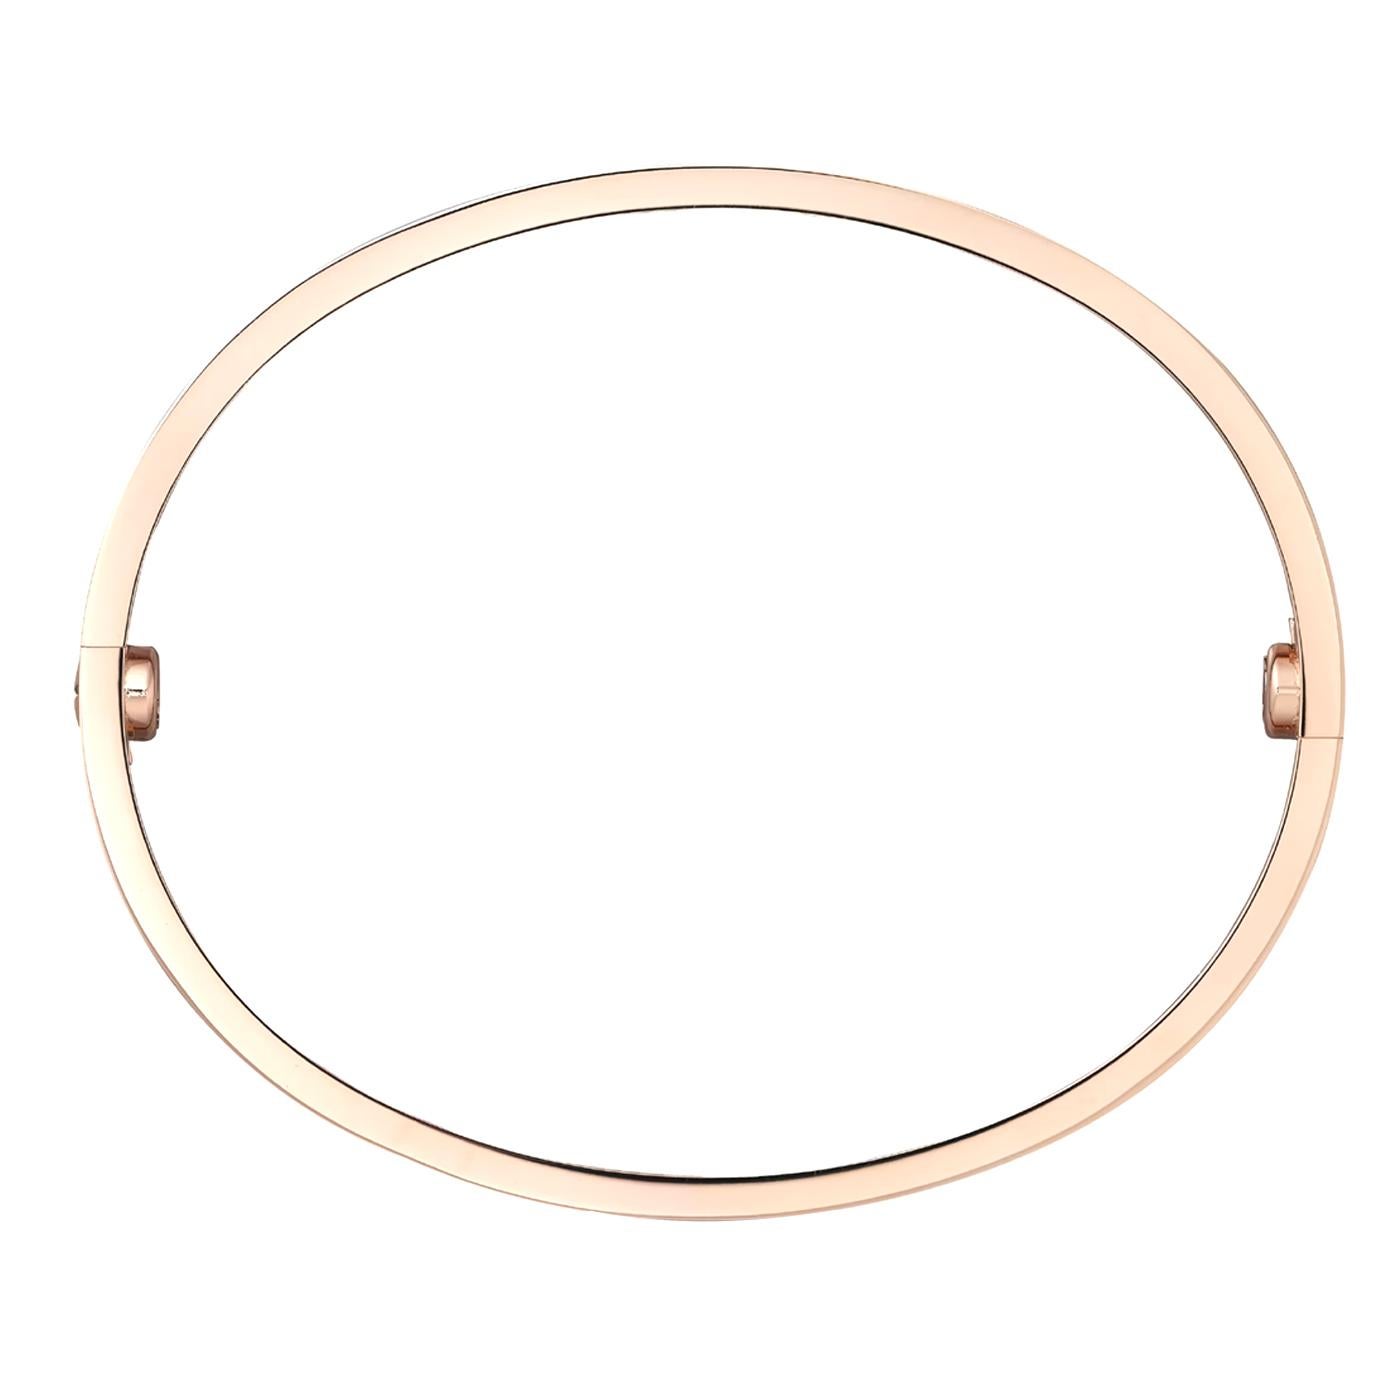 LOVE bracelet, 18K rose gold. Created in New York in 1969, the LOVE bracelet is an icon of jewelry design: a close-fitting, oval bracelet composed of two rigid arcs that is worn on the wrist and removed using a specific screwdriver. The closure is